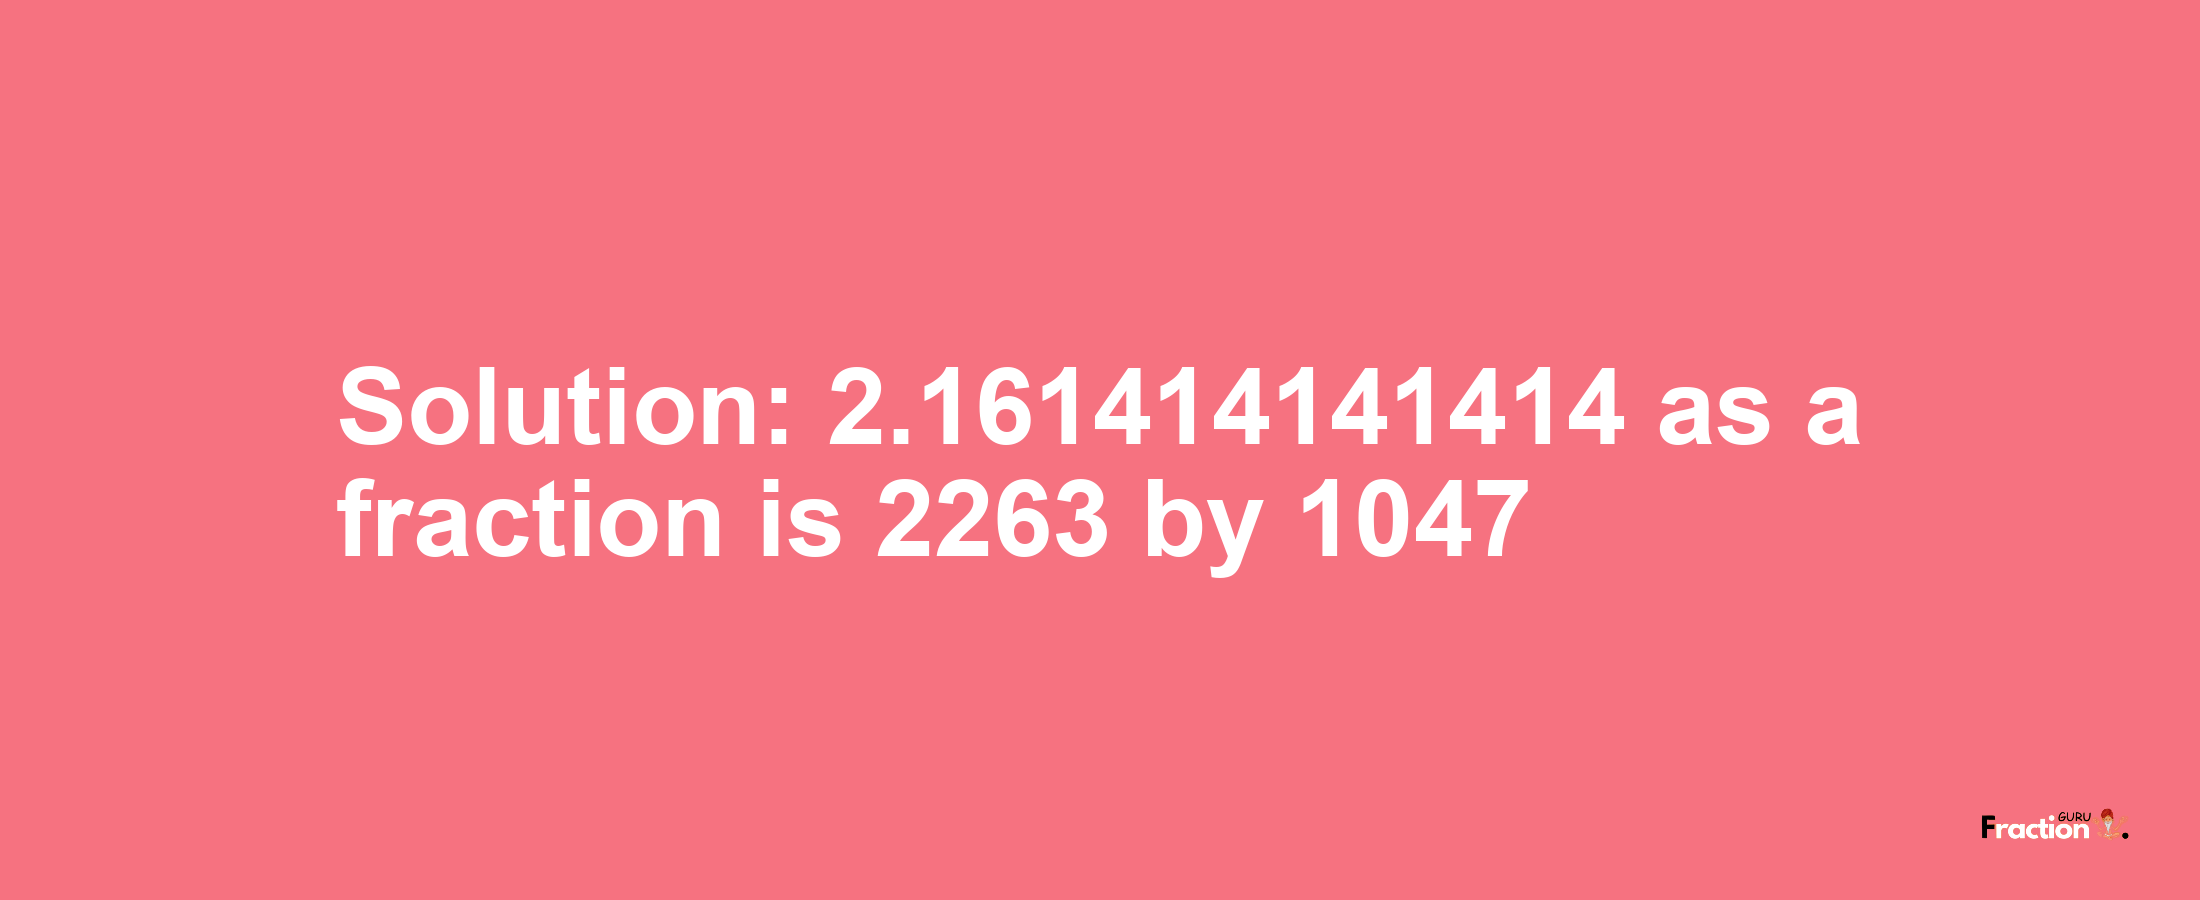 Solution:2.161414141414 as a fraction is 2263/1047